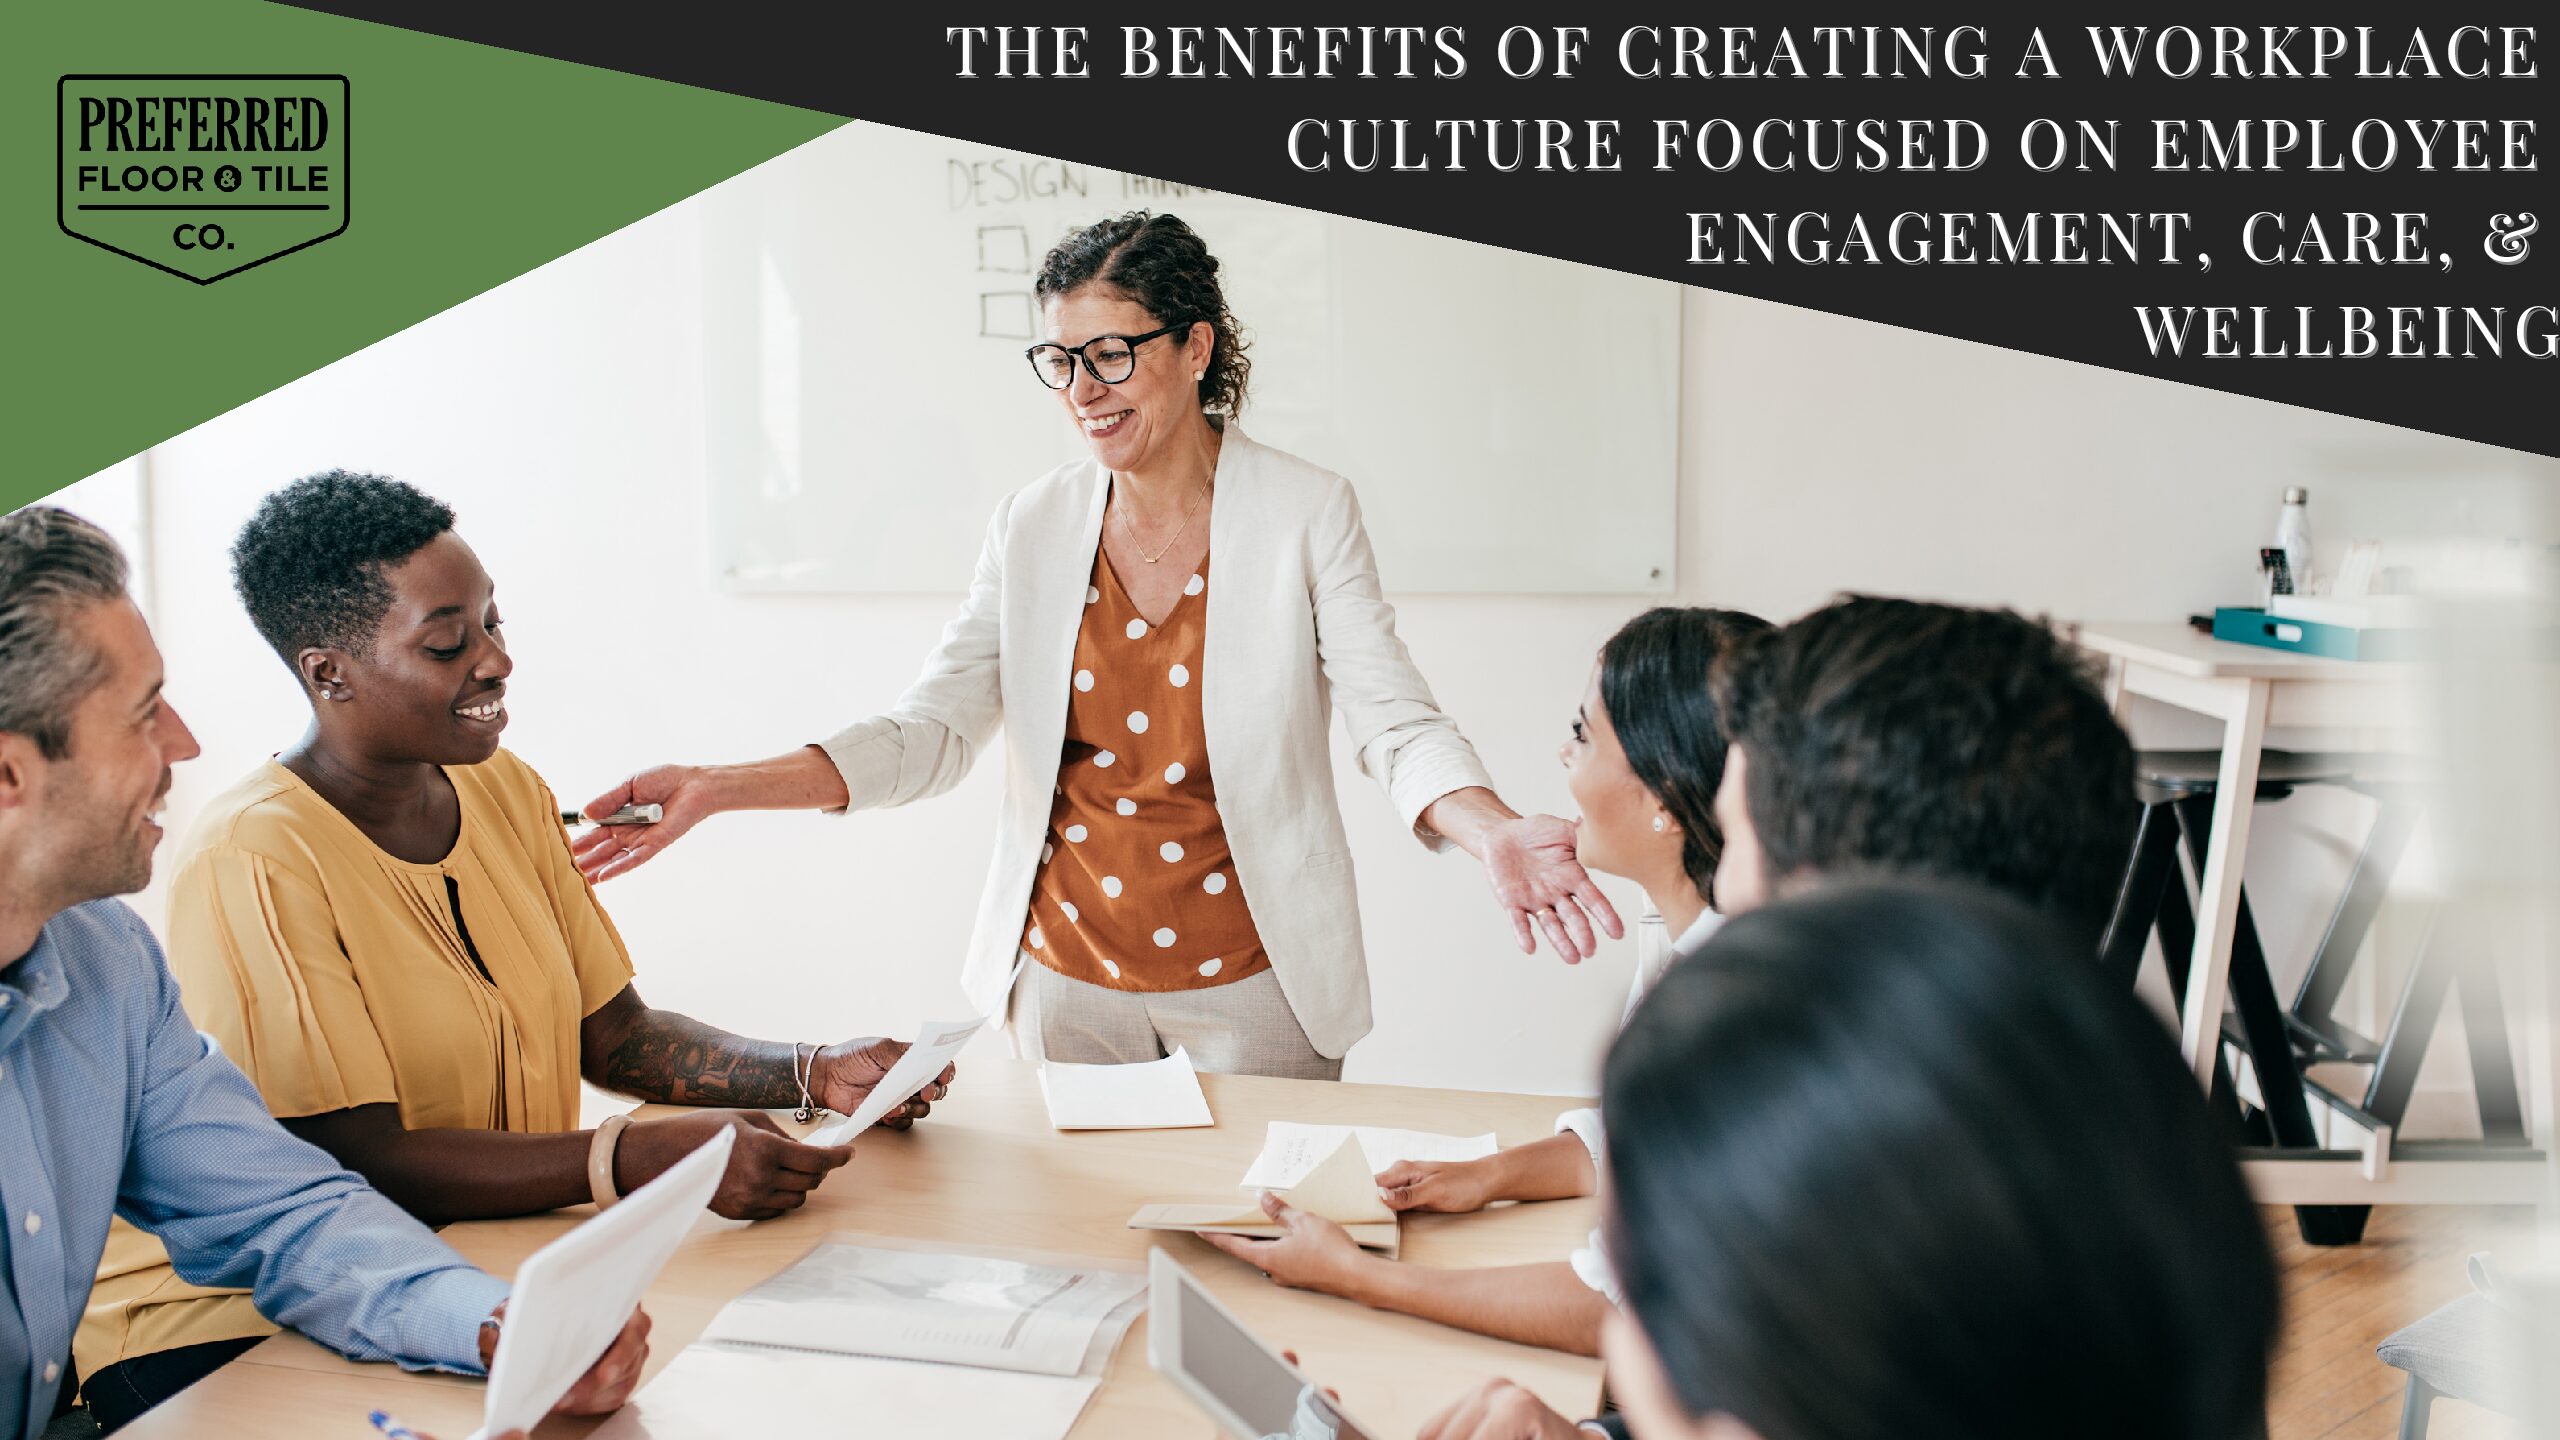 The Benefits of Creating a Workplace Culture Focused on Employee Engagement, Care, & Wellbeing